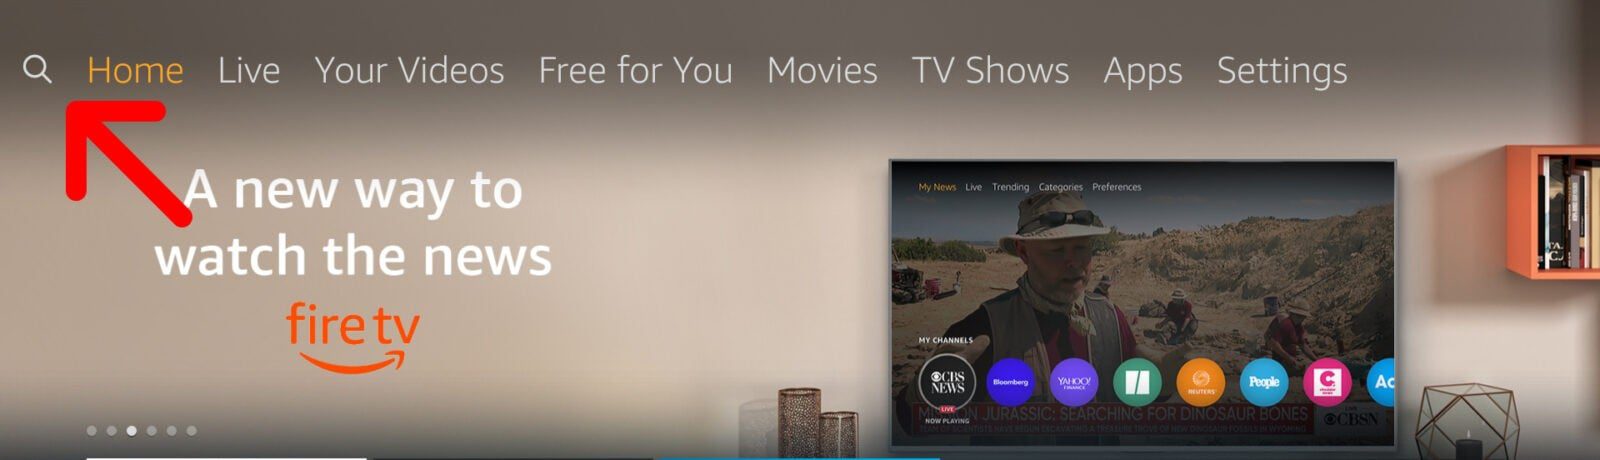 How to Download Apps on a Fire TV Stick